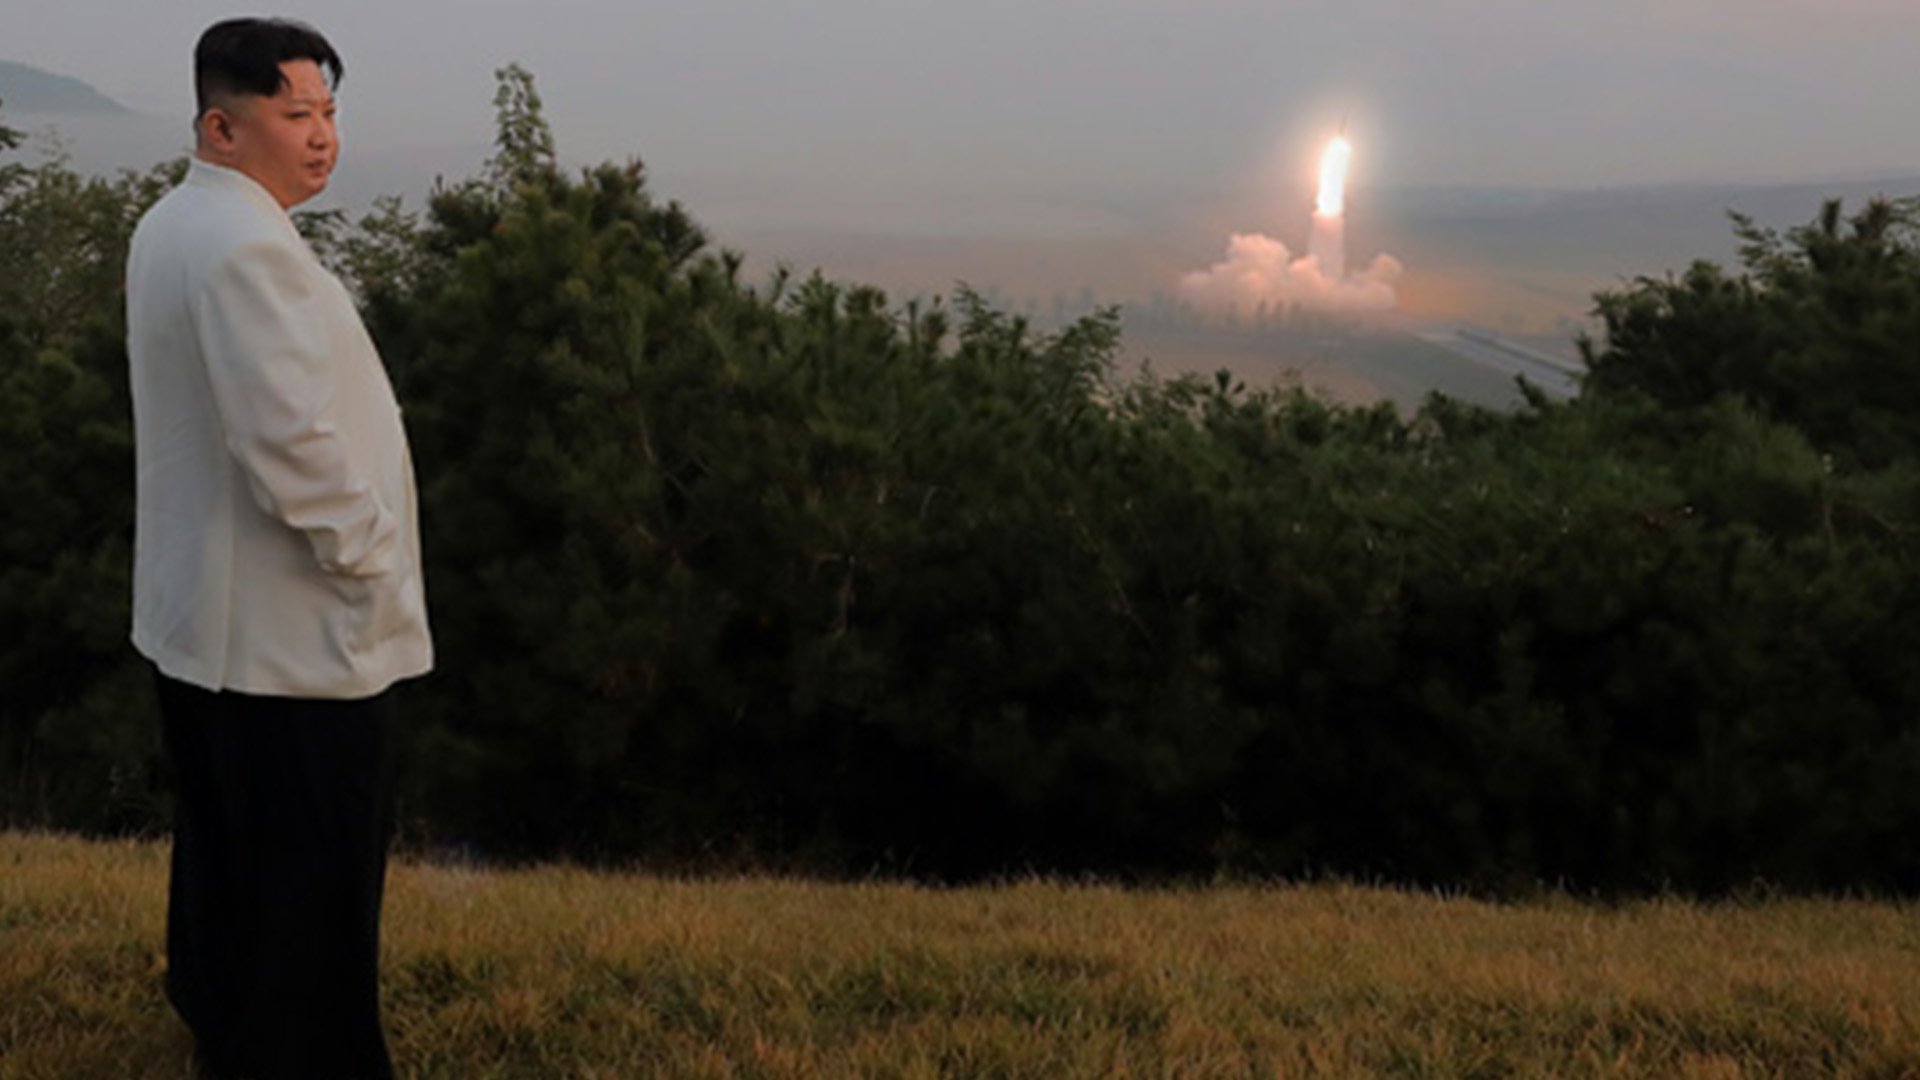 Dictator Kim Jong Un directs a missile launch at an undisclosed location in North Korea, according to an image released Oct. 10, 2022, by the state-controlled newspaper Rodong Sinmun. Photo by Rodong Sinmun.